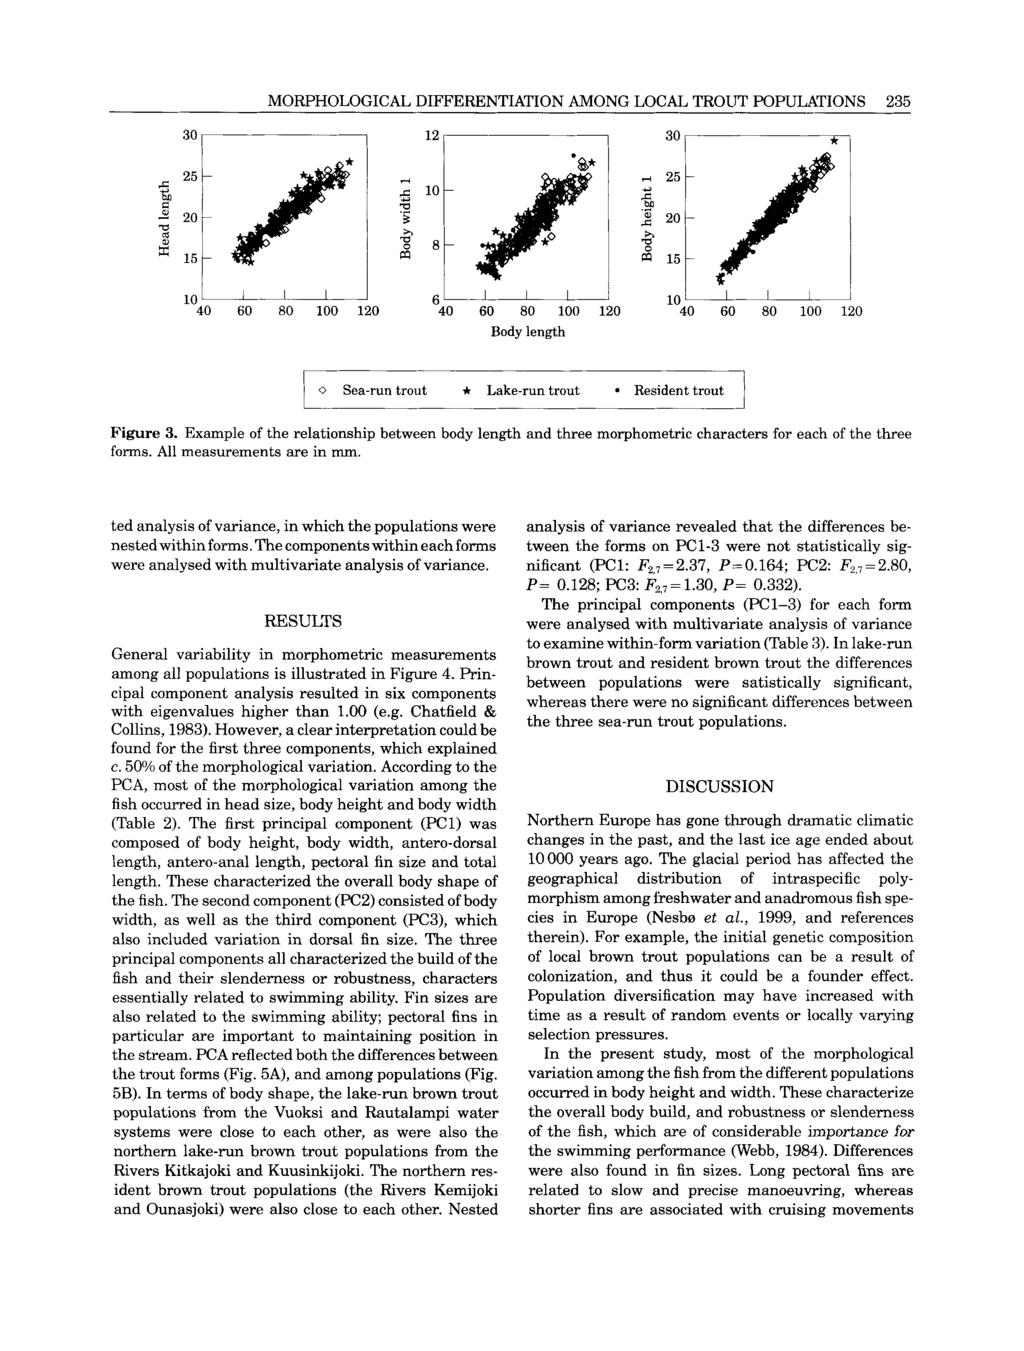 MORPHOLOGICAL DIFFERENTIATION AMONG LOCAL TROUT POPULATIONS 235 40 60 80 100 120 40 60 80 100 120 40 60 80 100 120 Body length o Sea-run trout * Lake-run trout Resident trout Figure 3.